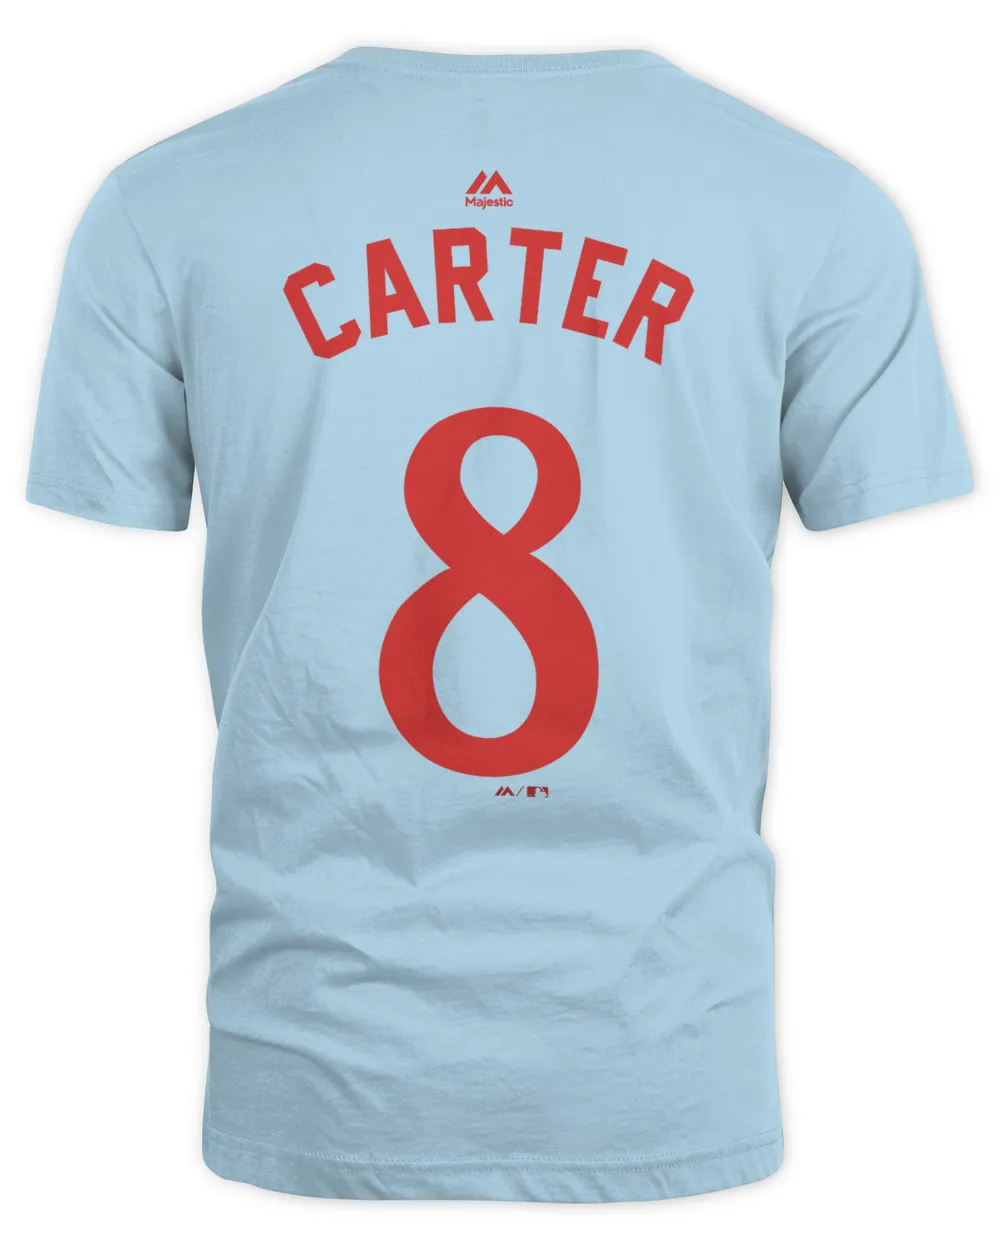 Men's Majestic Gary Carter Light Blue Montreal Expos Cooperstown Player  Name & Number Tshirt